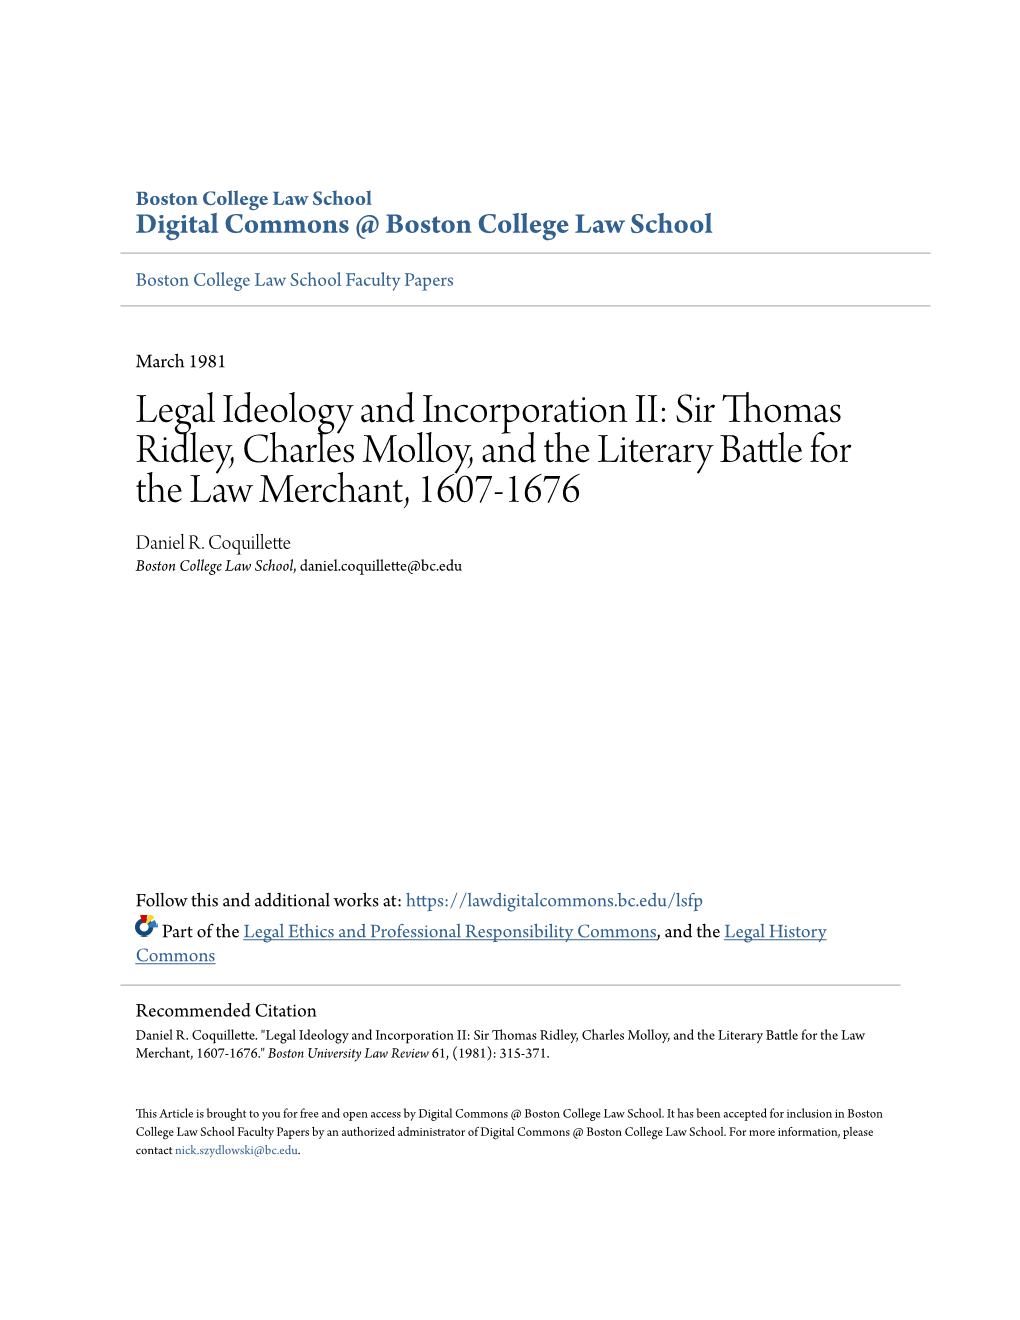 Sir Thomas Ridley, Charles Molloy, and the Literary Battle for the Law Merchant, 1607-1676 Daniel R